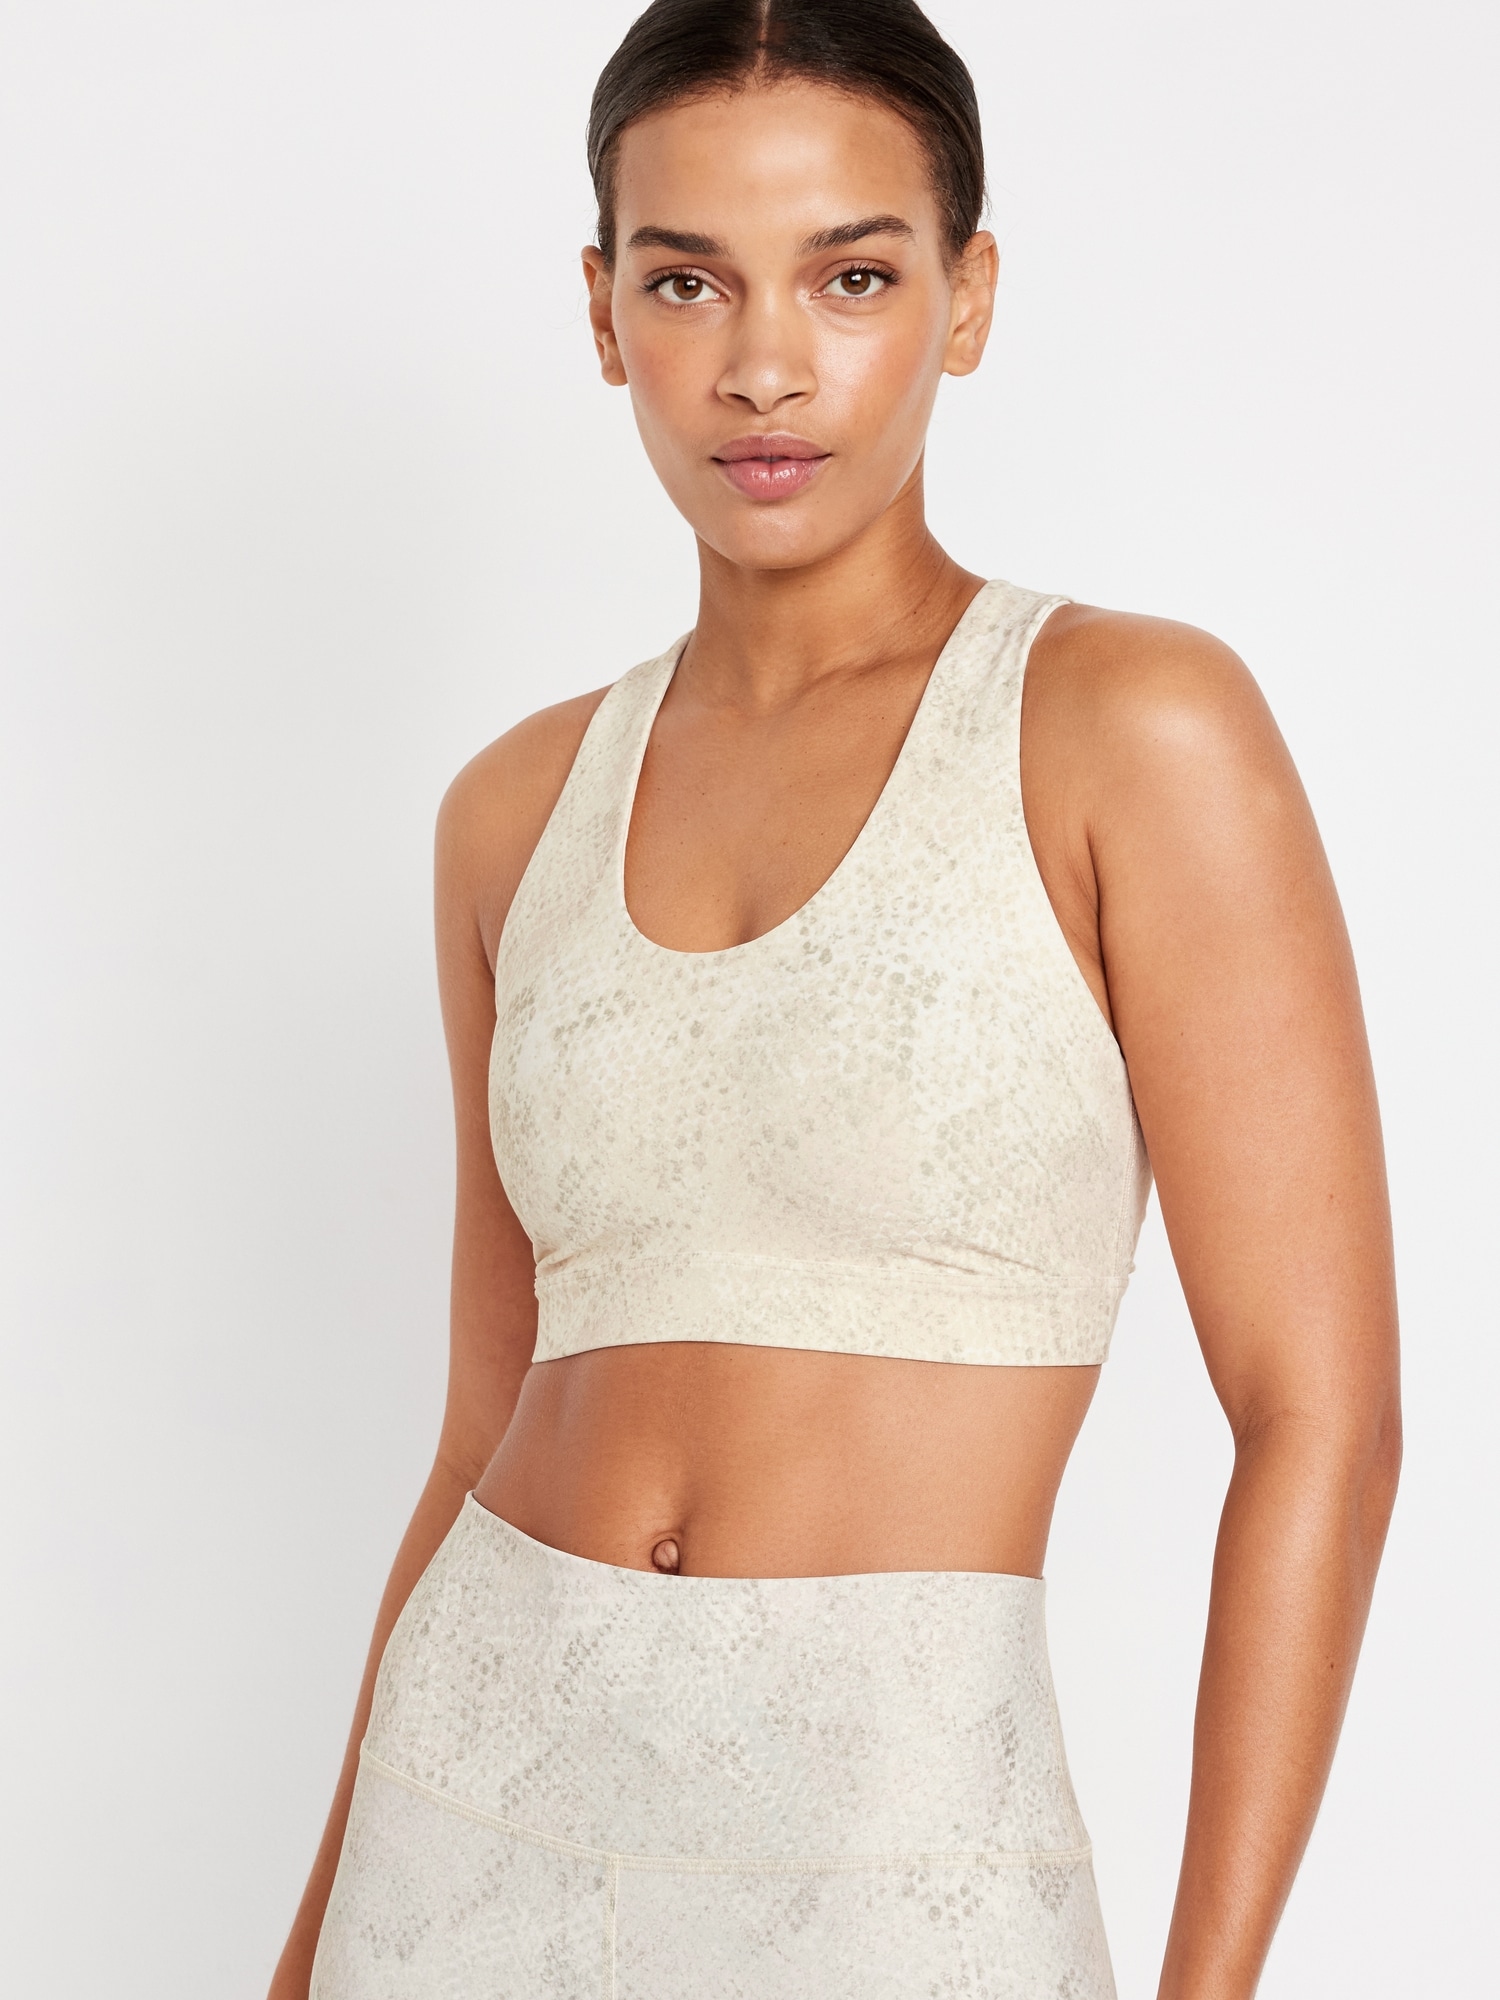 Lace Bralette Crop Top For $10.97! - Kawaii Stop